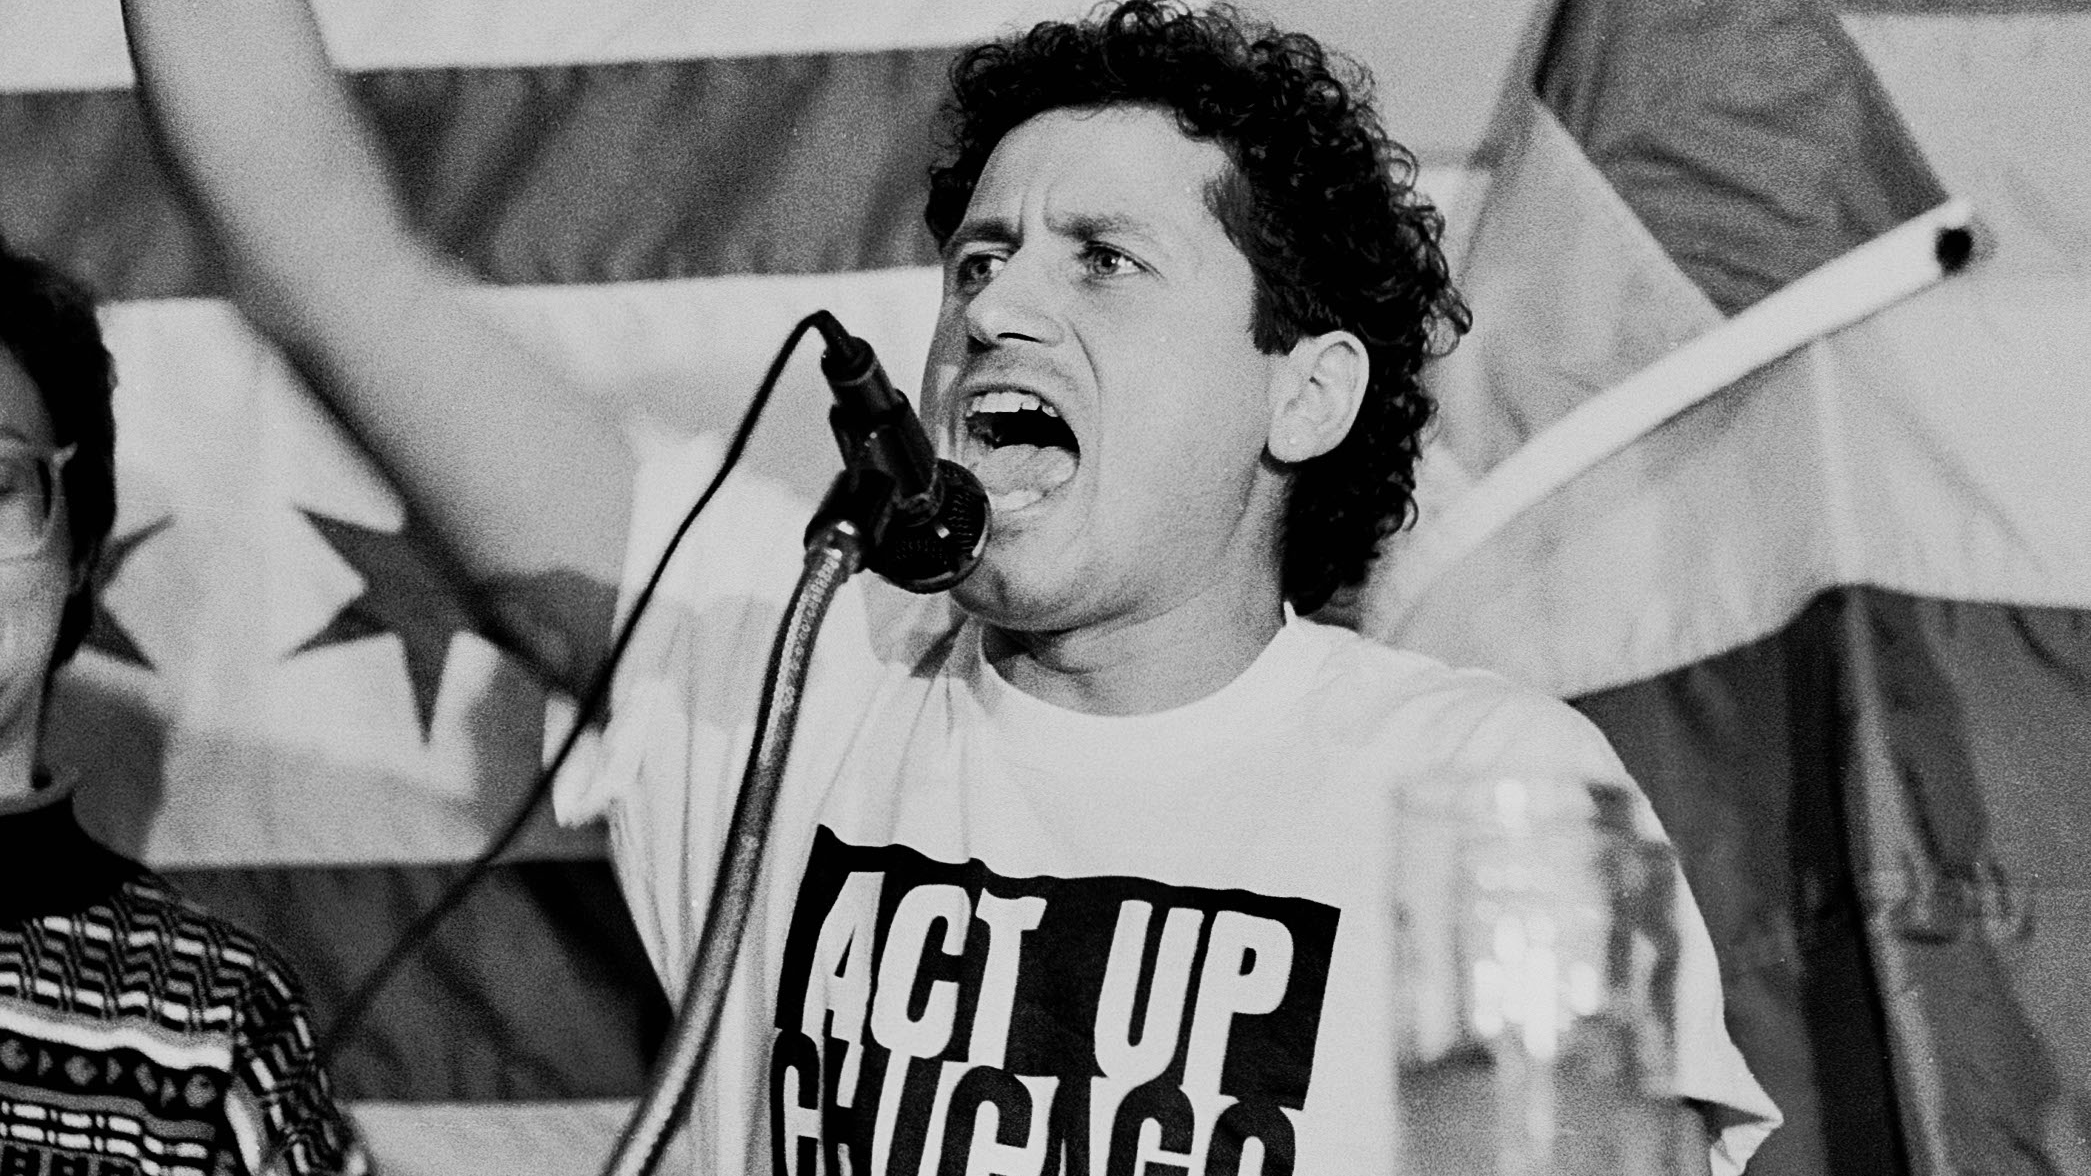 Chicago AIDS activist Danny Sotomayor speaks at a rally. Credit: Lisa Howe-Ebright, photographer.